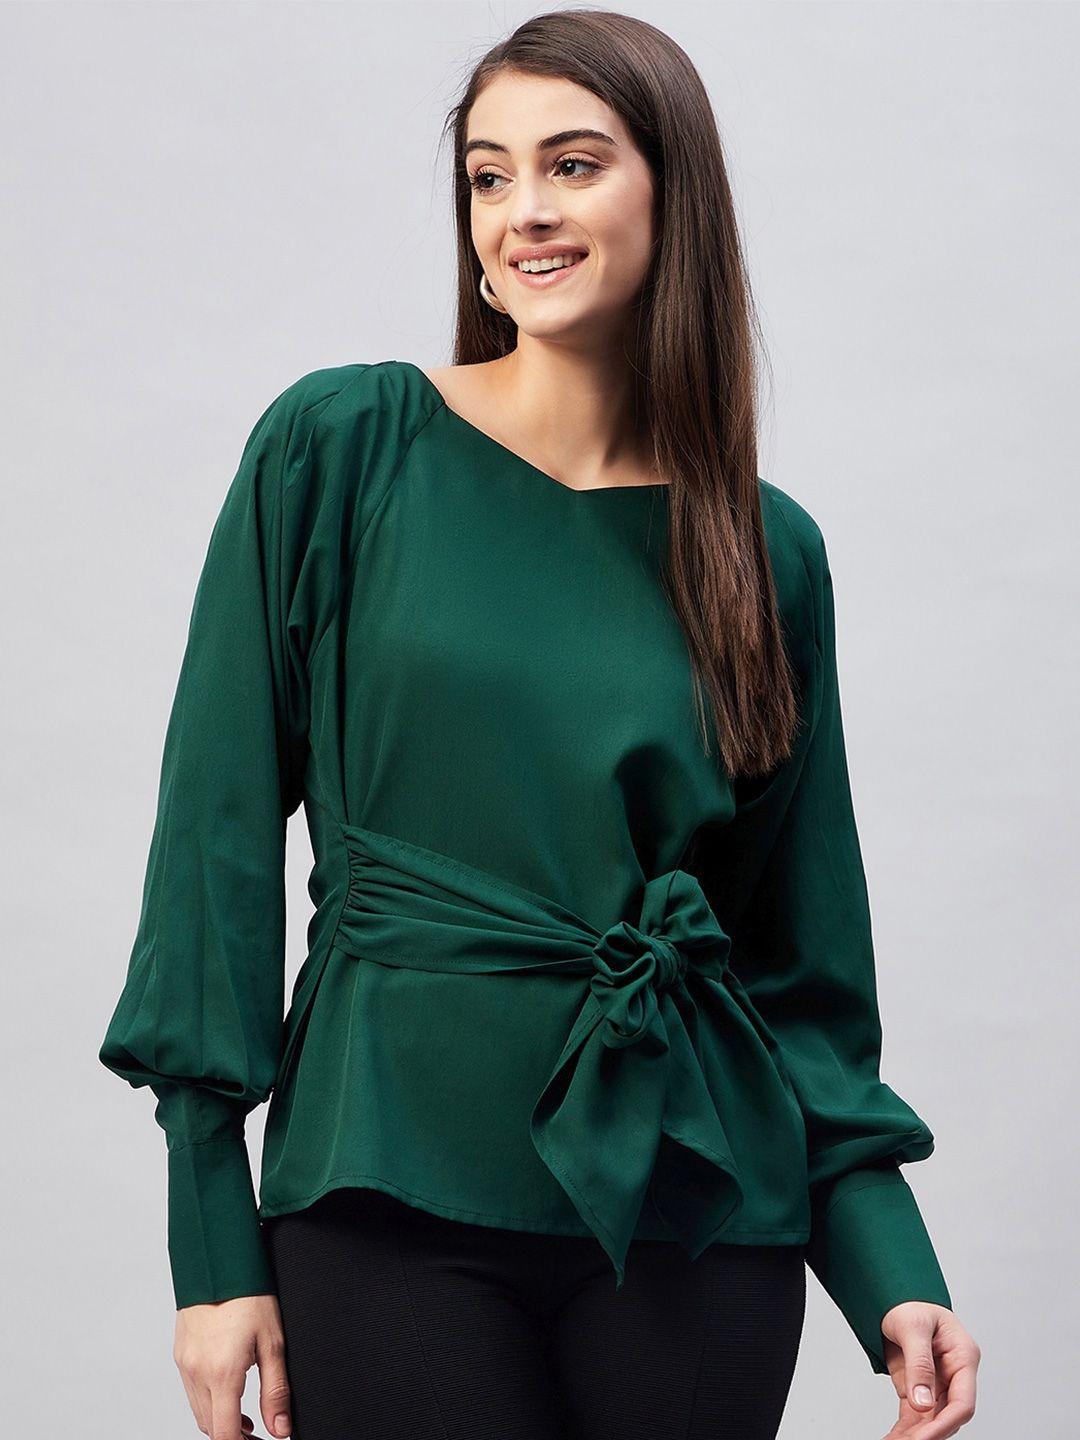 rare-green-round-neck-cinched-waist-top